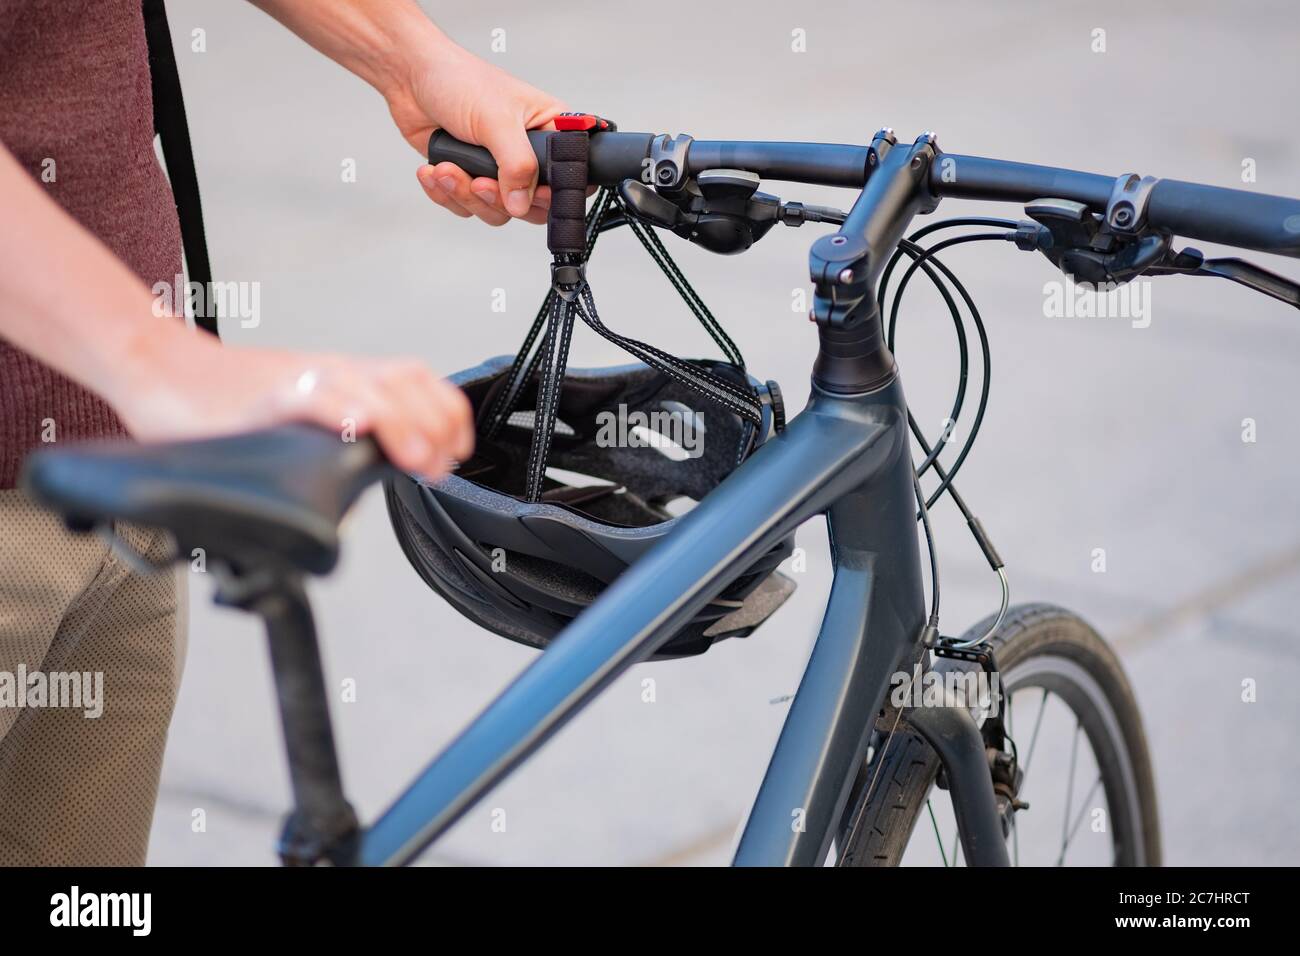 Commuter bike in hands of a male millennial, urban background. Safe cycling in the city, active urban lifestyle, messenger or delivery man concept Stock Photo